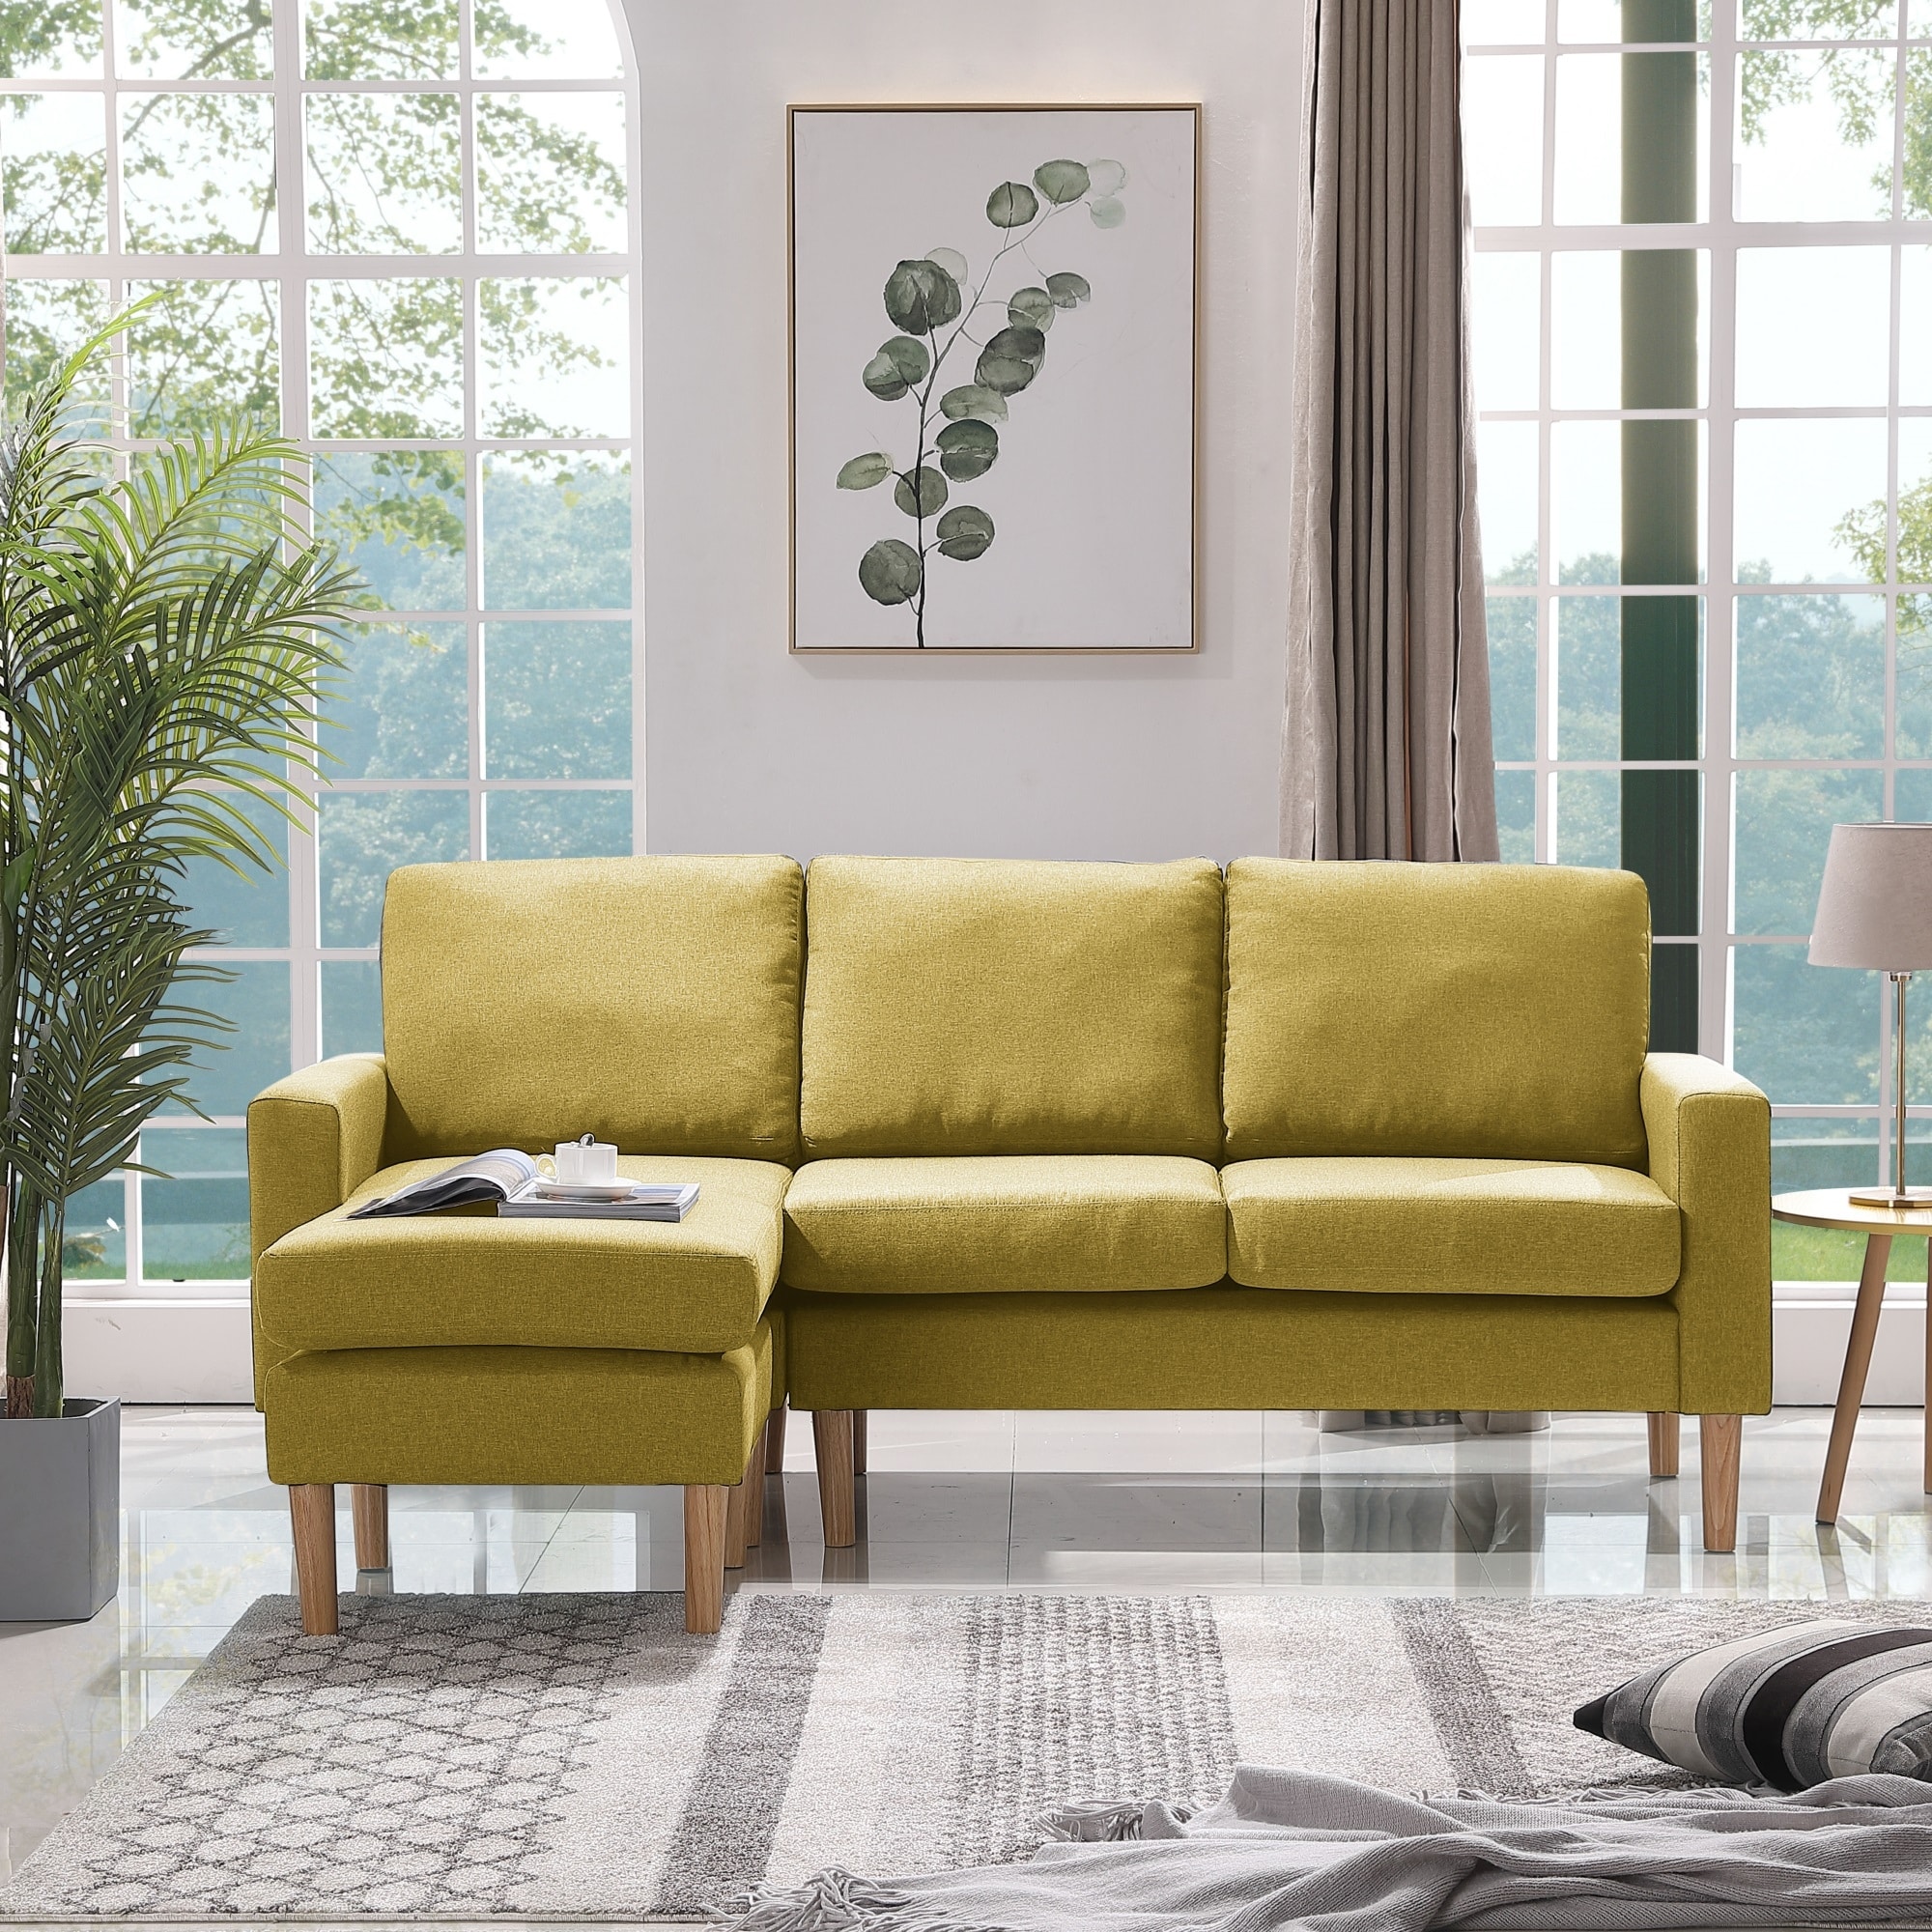 LivEditor Relax Lounge Sectional Sofa Left Facing Yellow Fabric Furniture